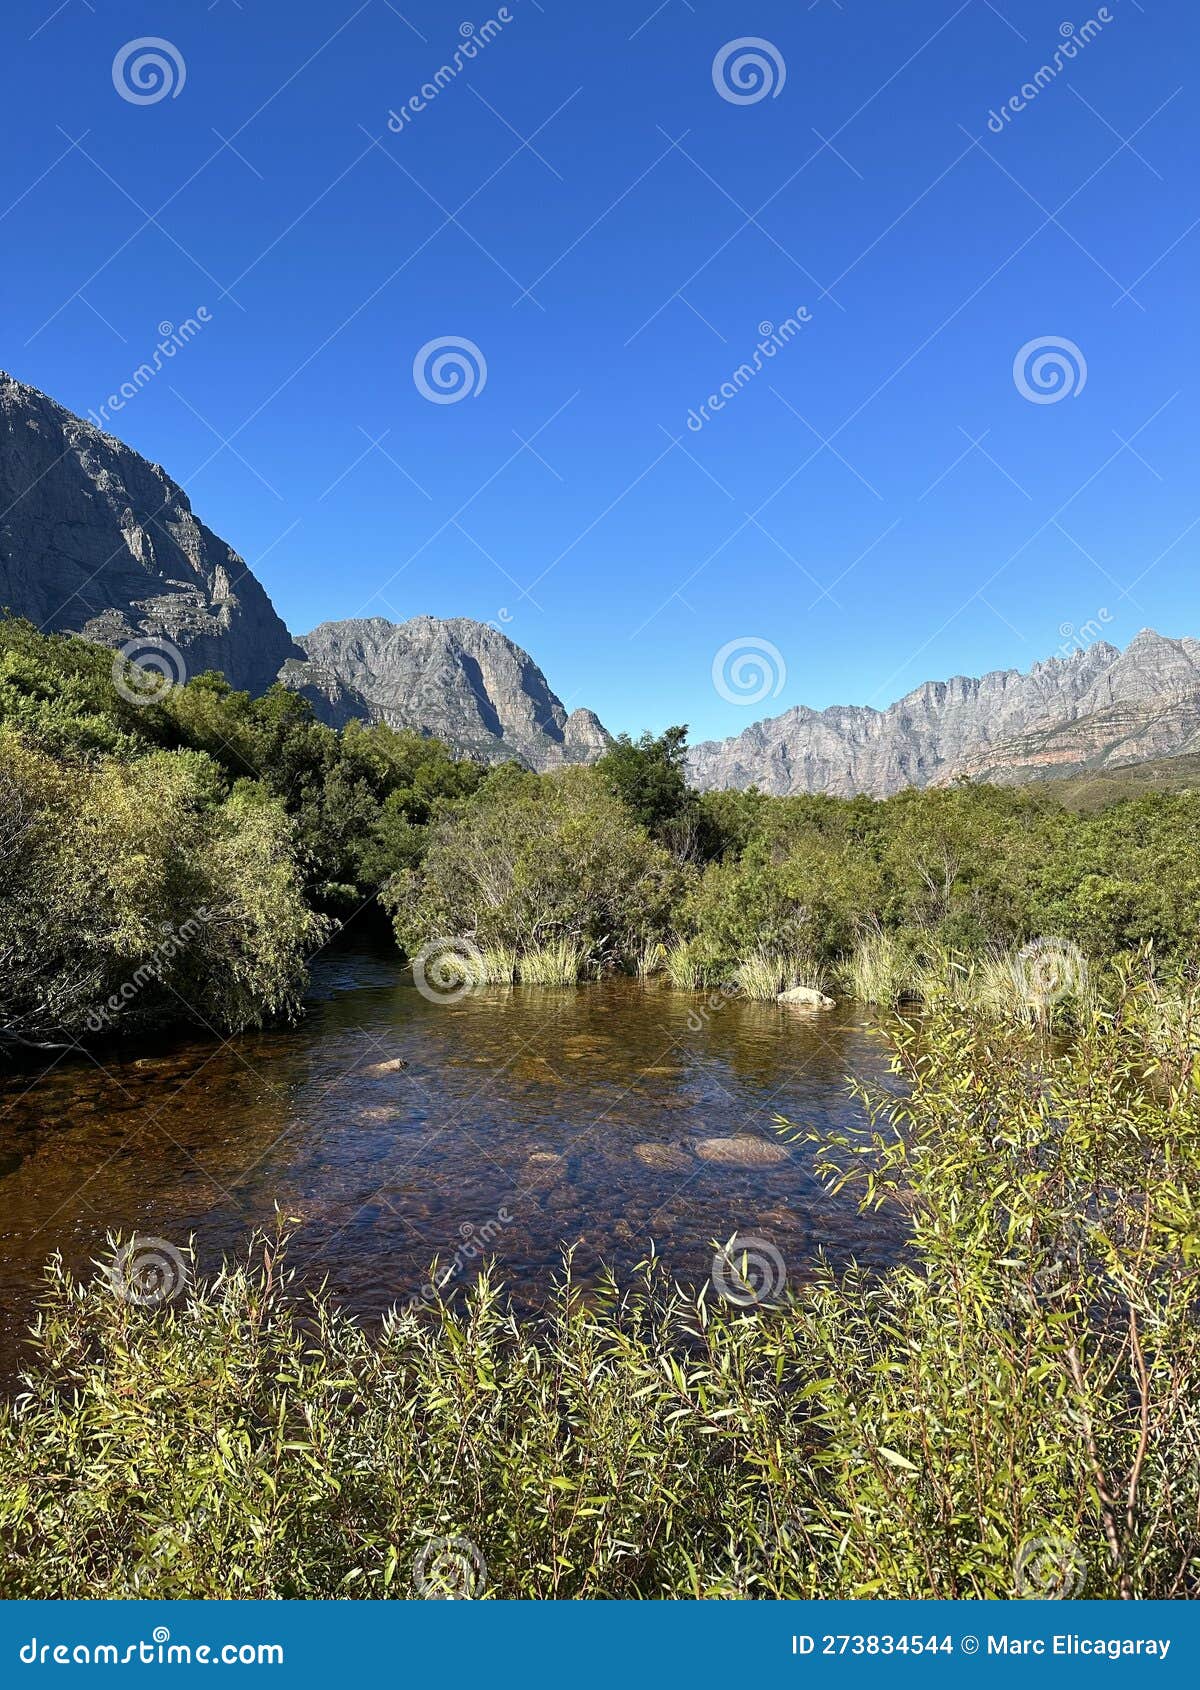 Krom River Limitberg Nature Reserve South Africa Stock Photo - Image of ...